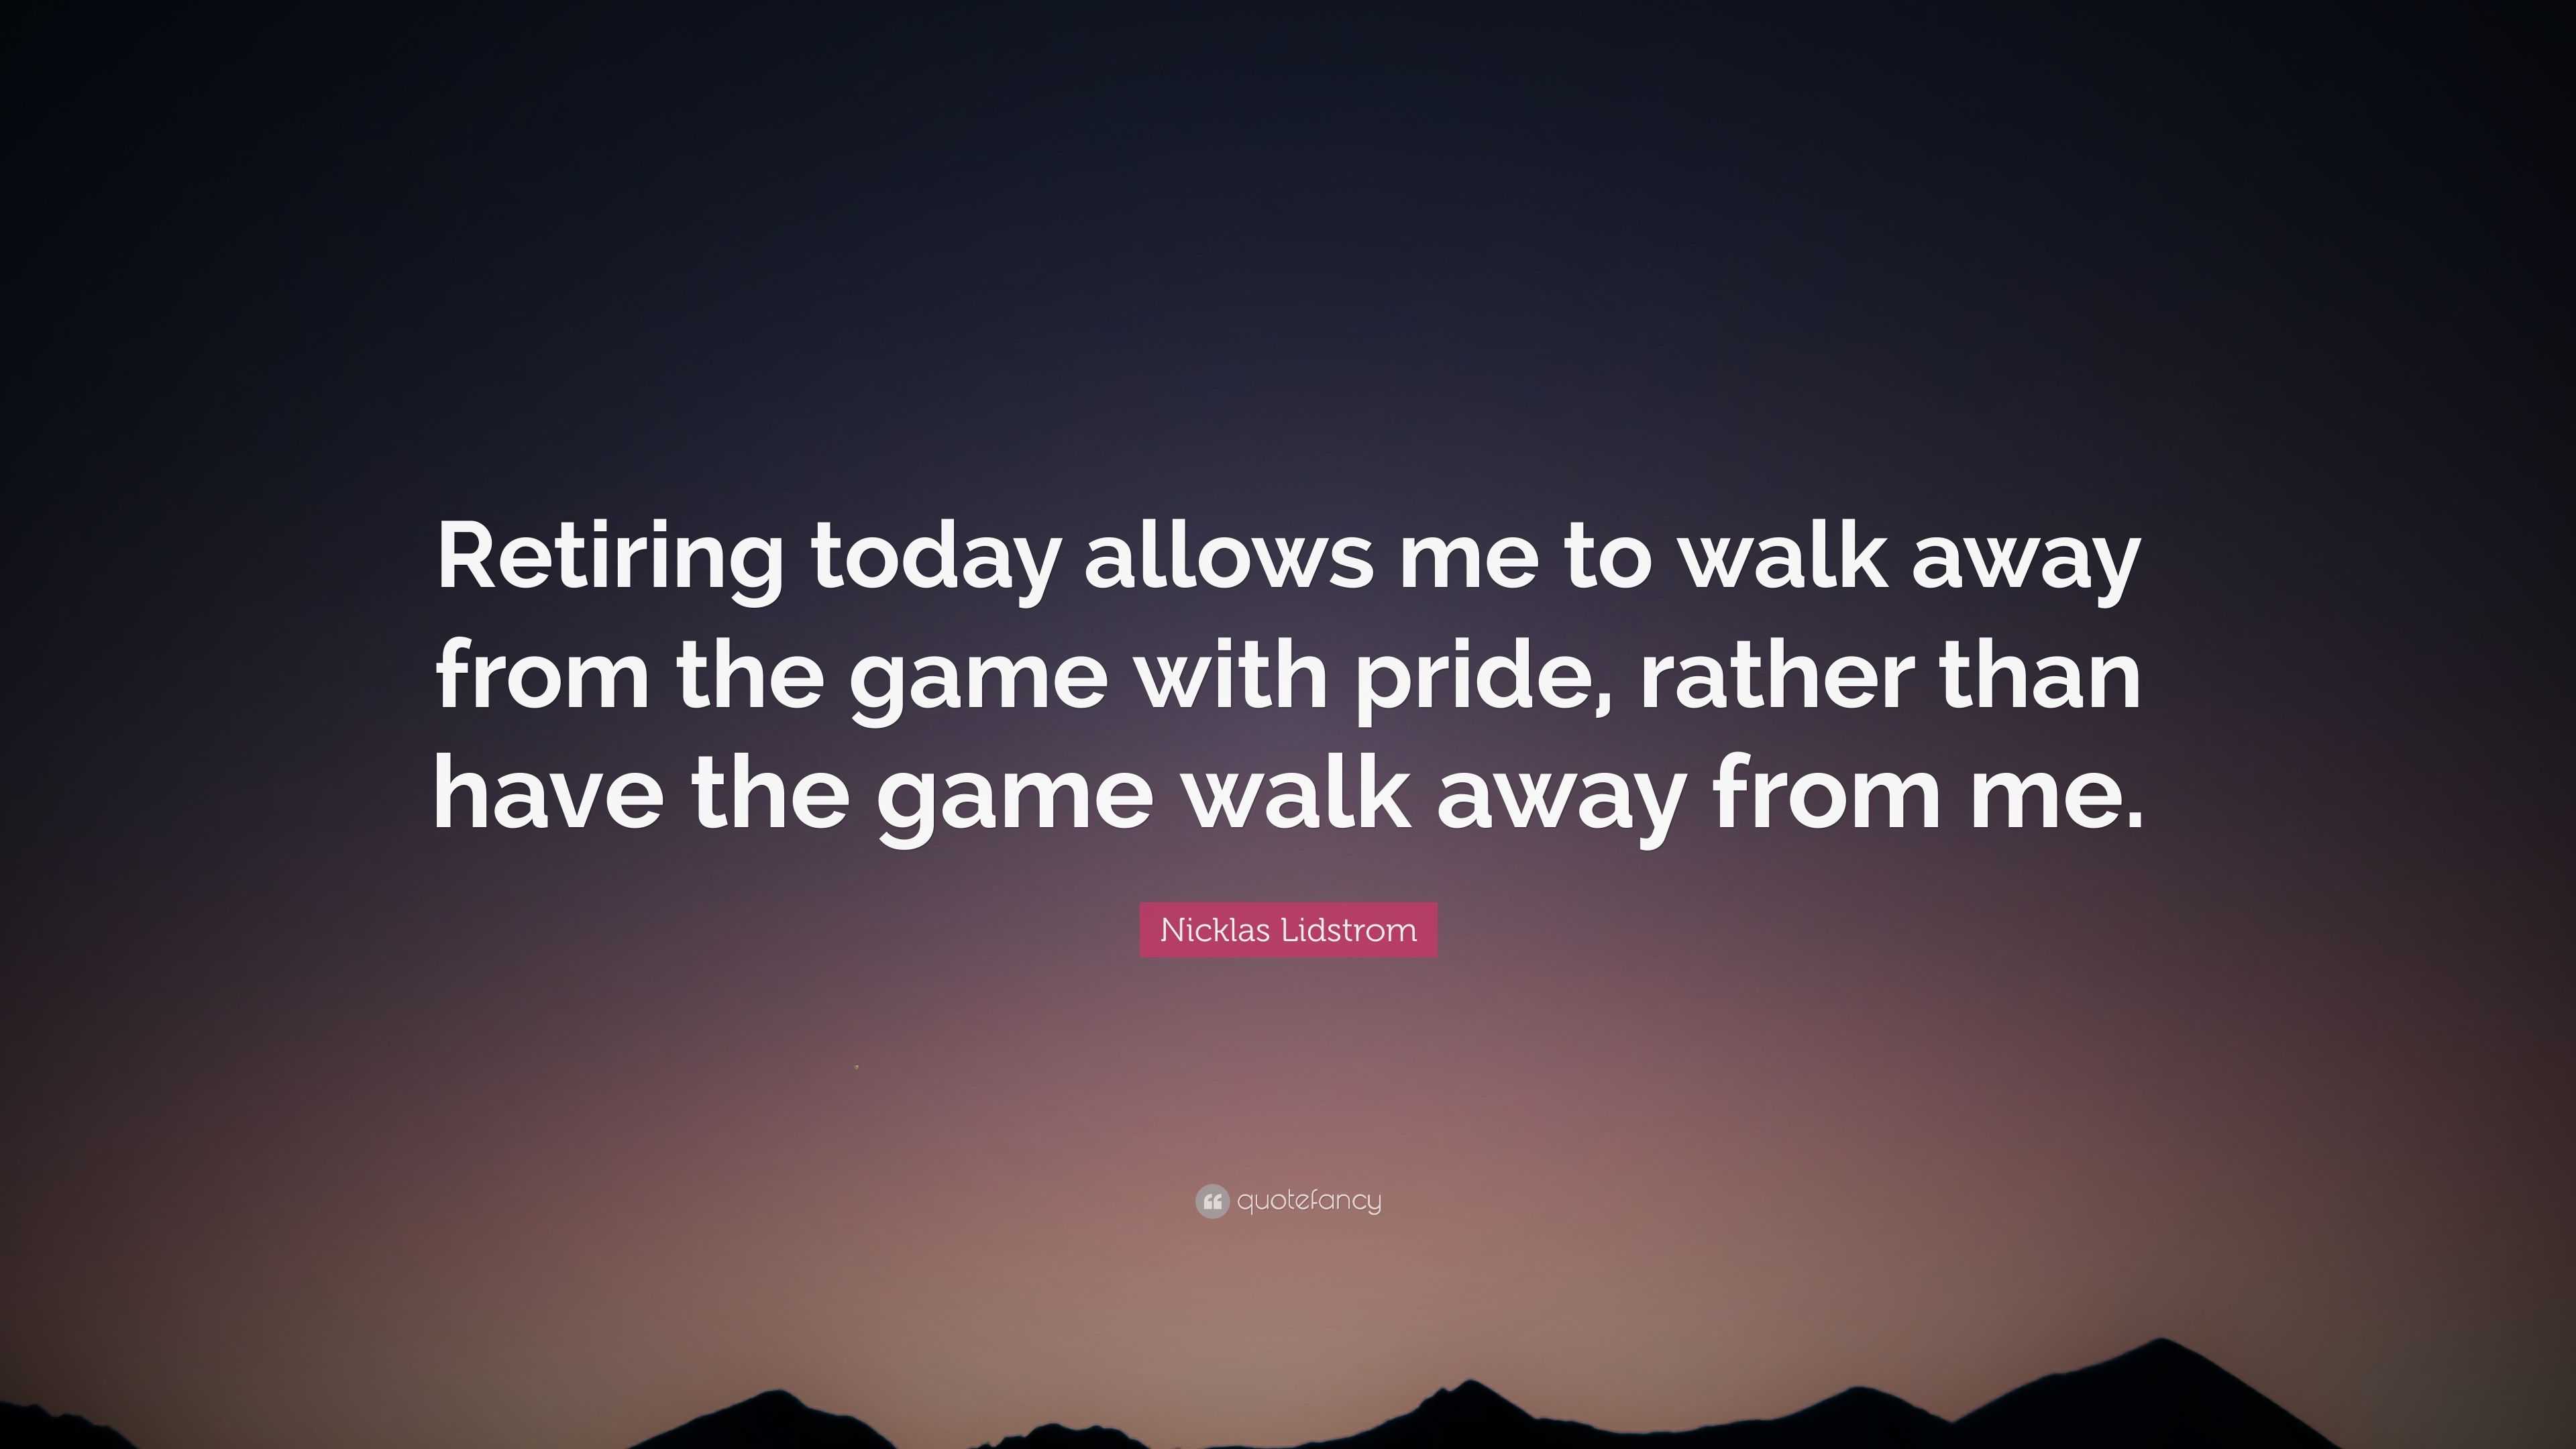 helvede Varme Ruddy Nicklas Lidstrom Quote: “Retiring today allows me to walk away from the  game with pride, rather